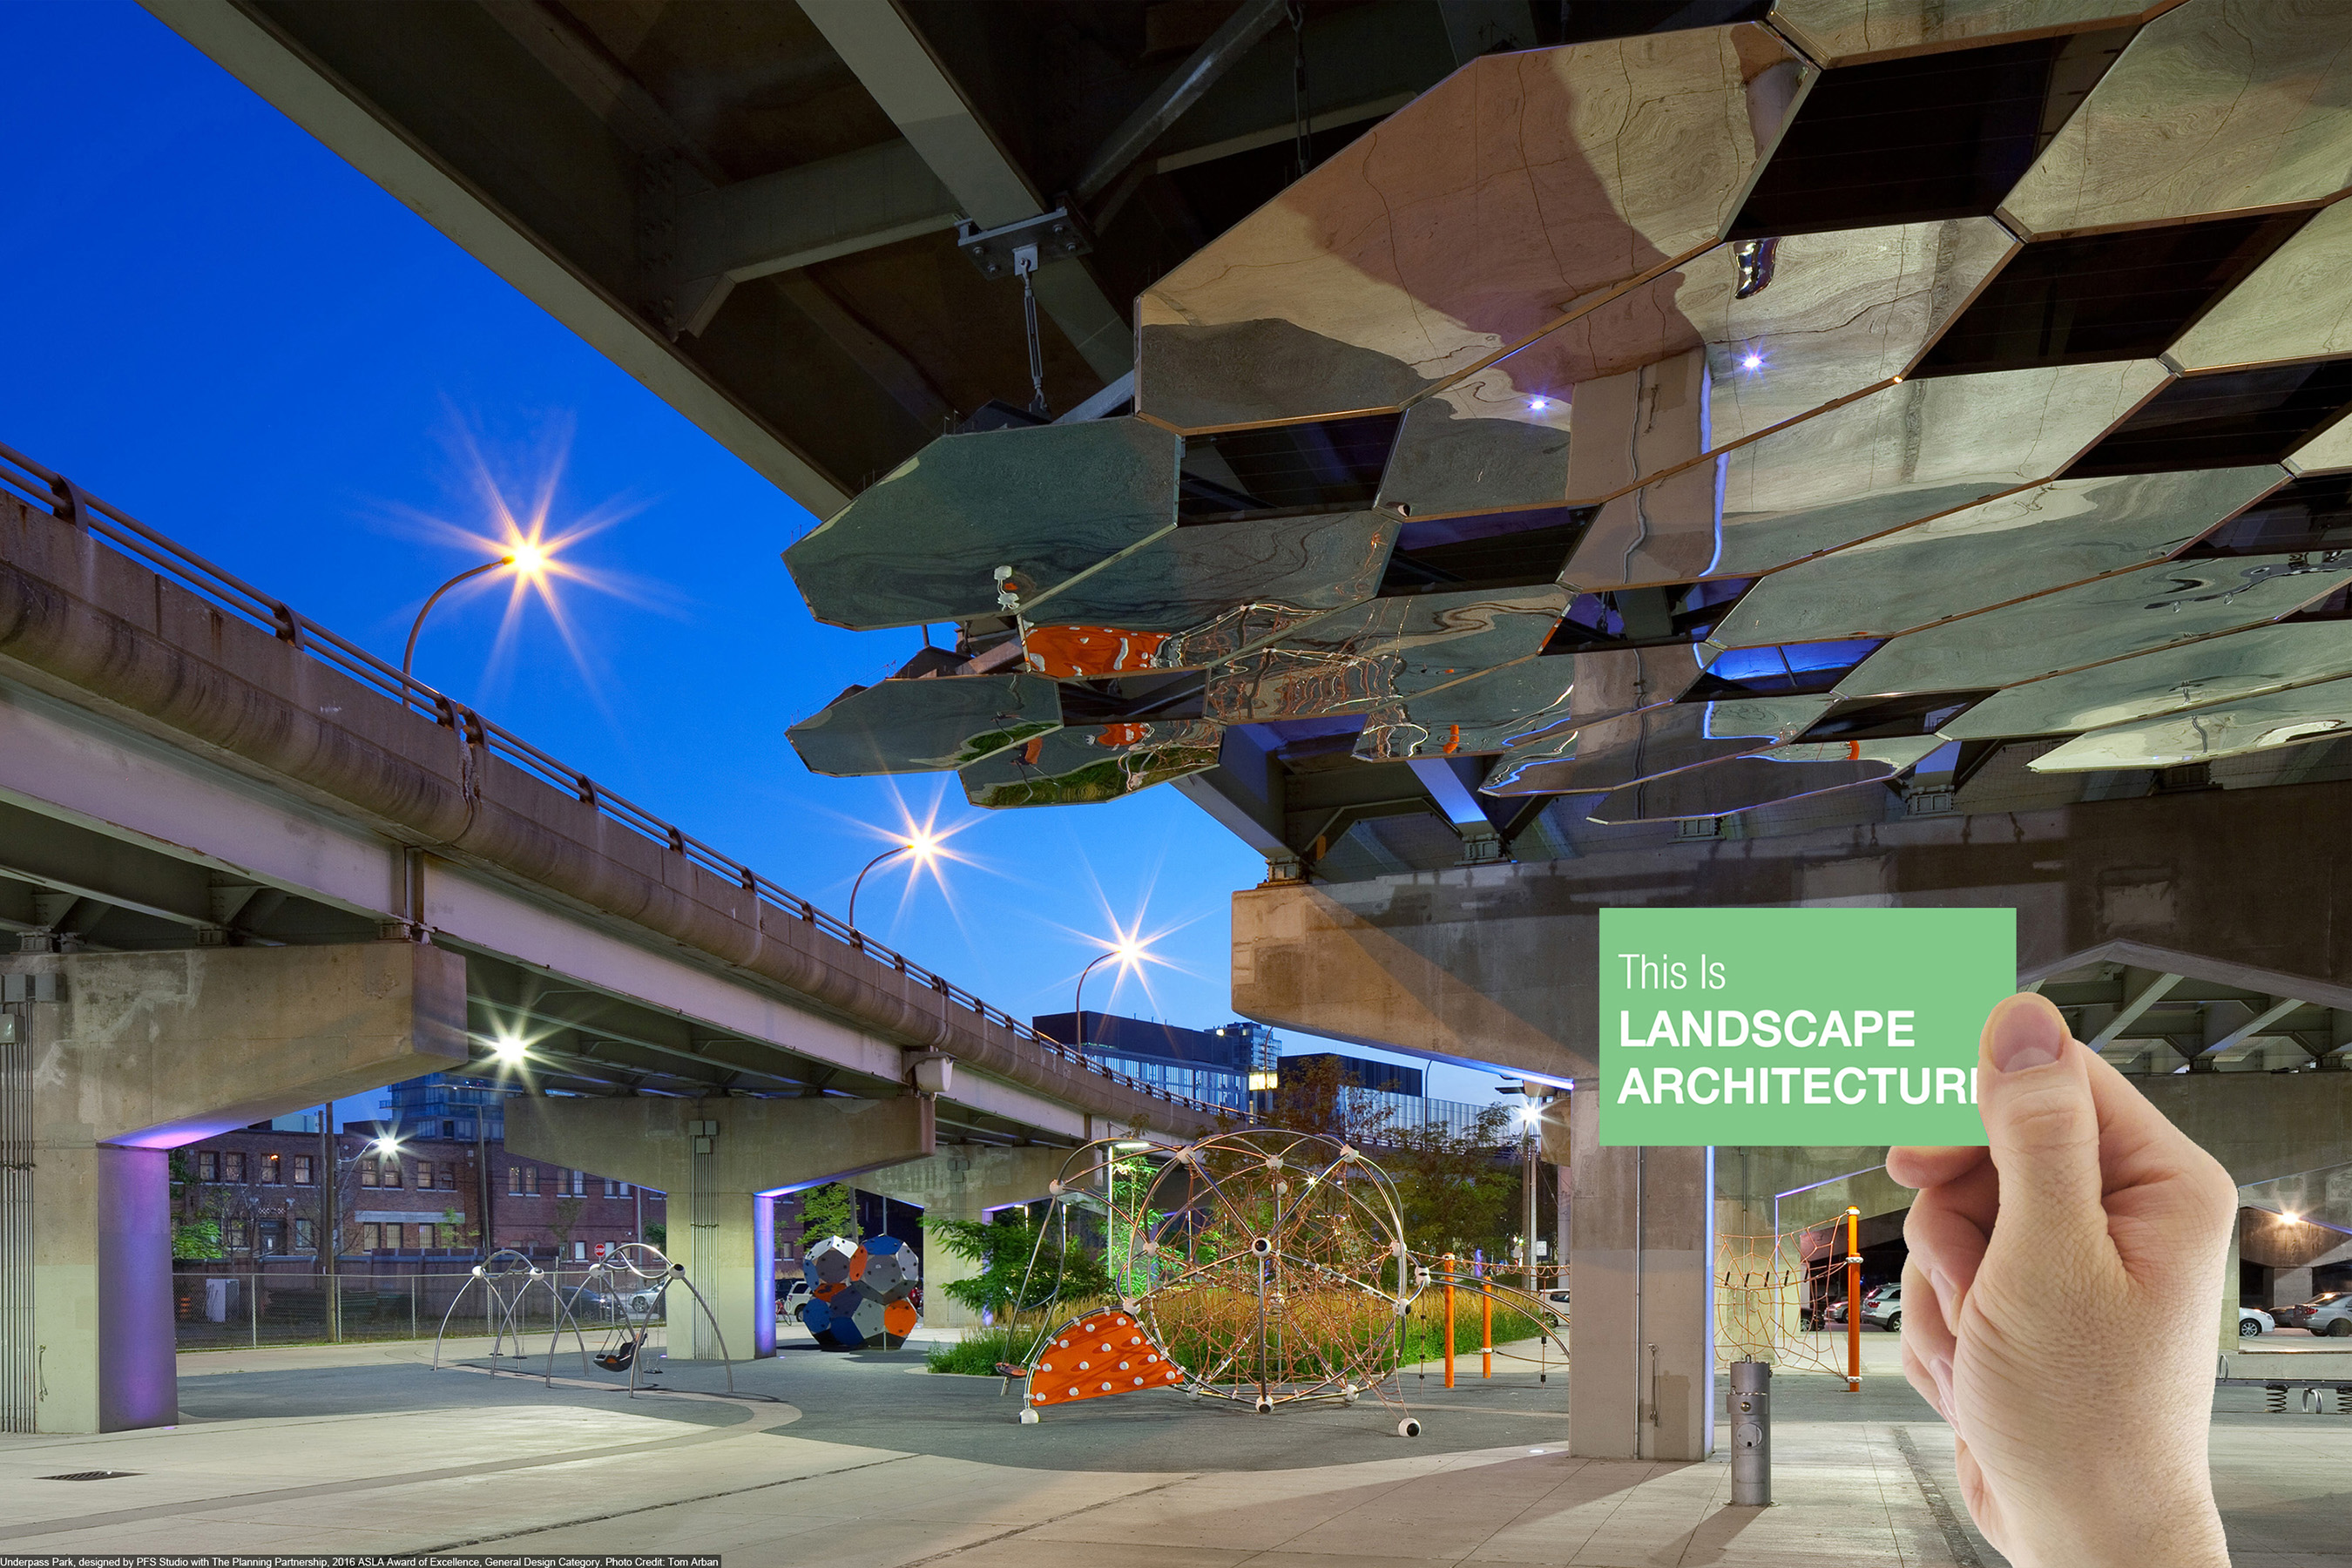 Underpass Park, designed by PFS Studio with The Planning Partnership, 2016 ASLA Award of Excellence, General Design Category. Photo Credit: Tom Arban.